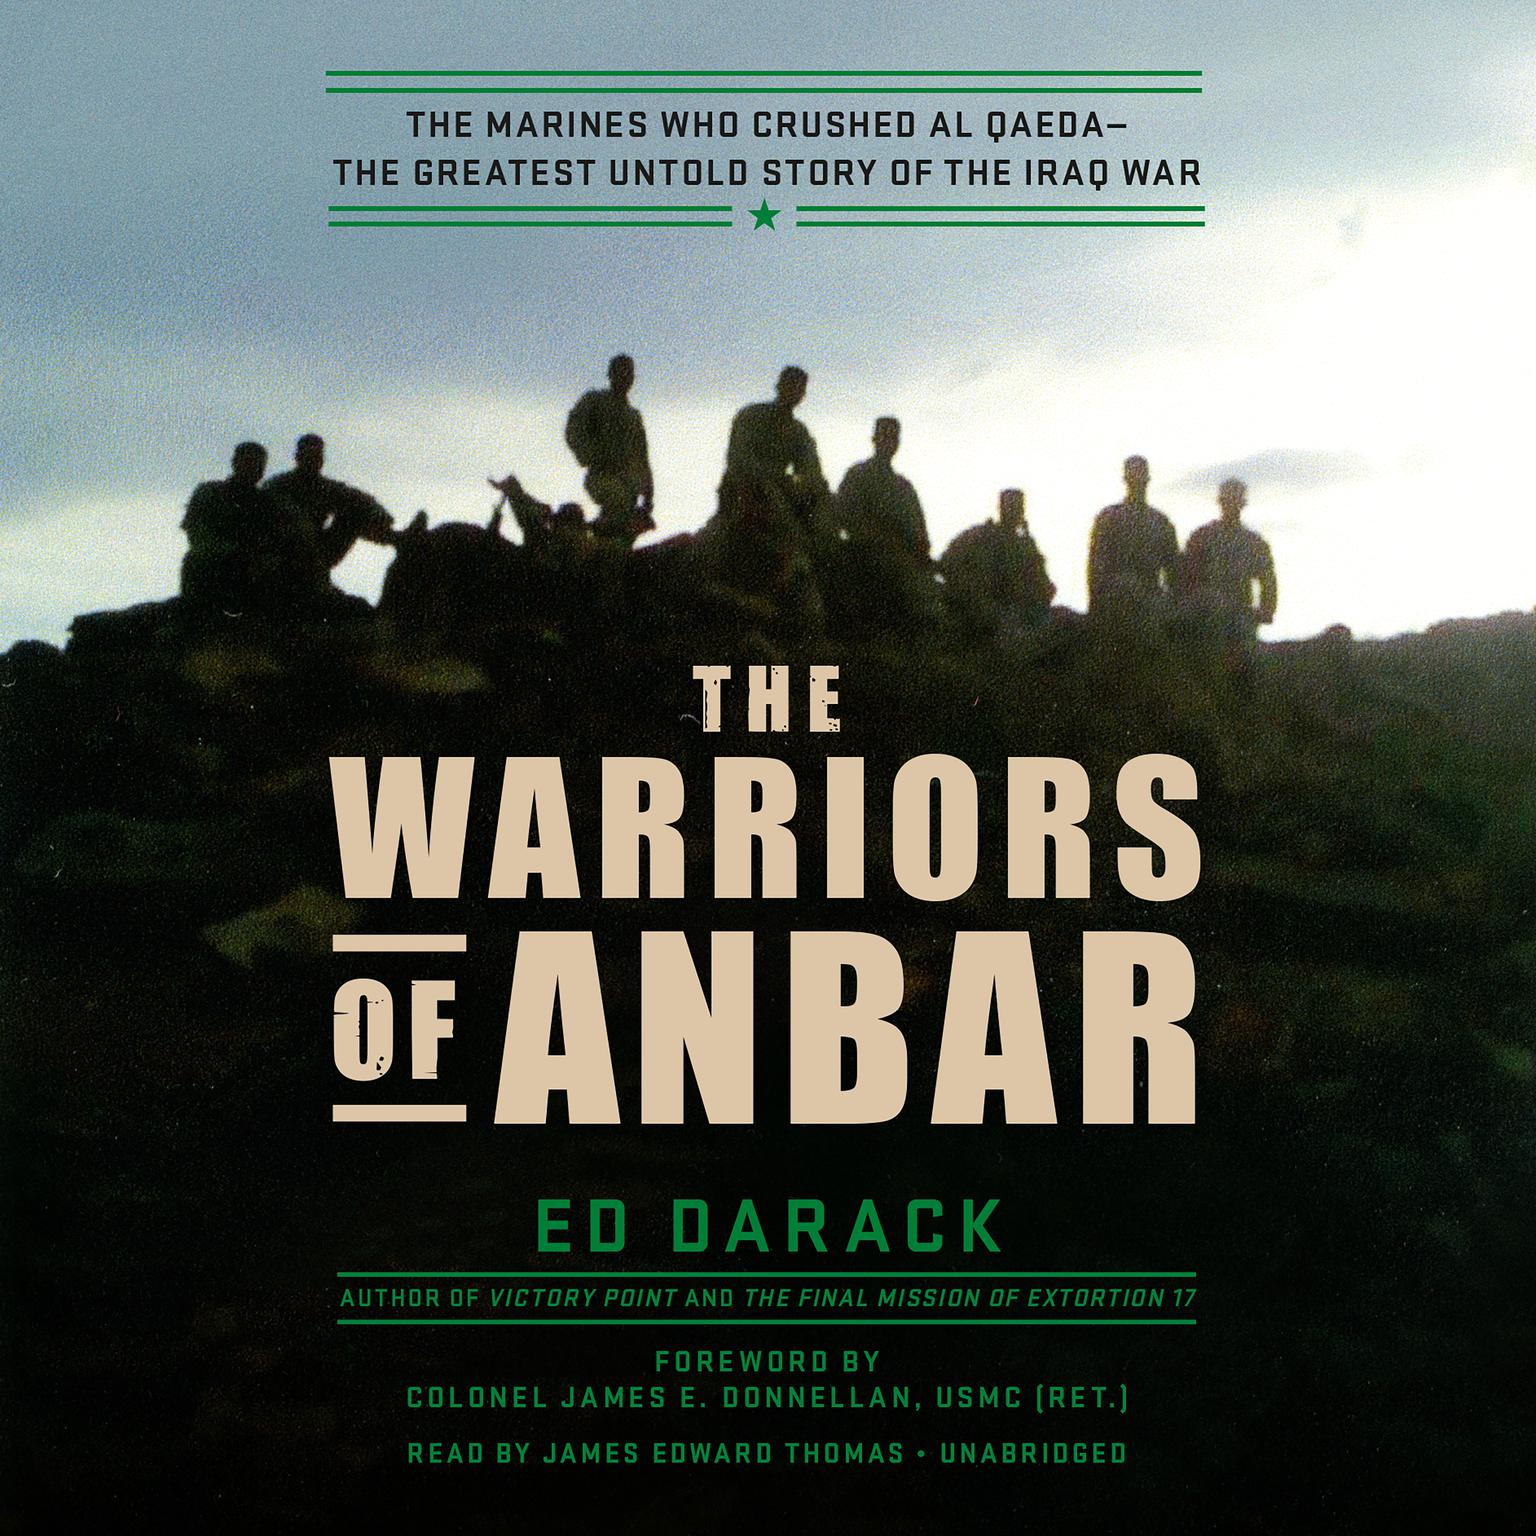 The Warriors of Anbar: The Marines Who Crushed Al Qaeda--the Greatest Untold Story of the Iraq War Audiobook, by Ed Darack